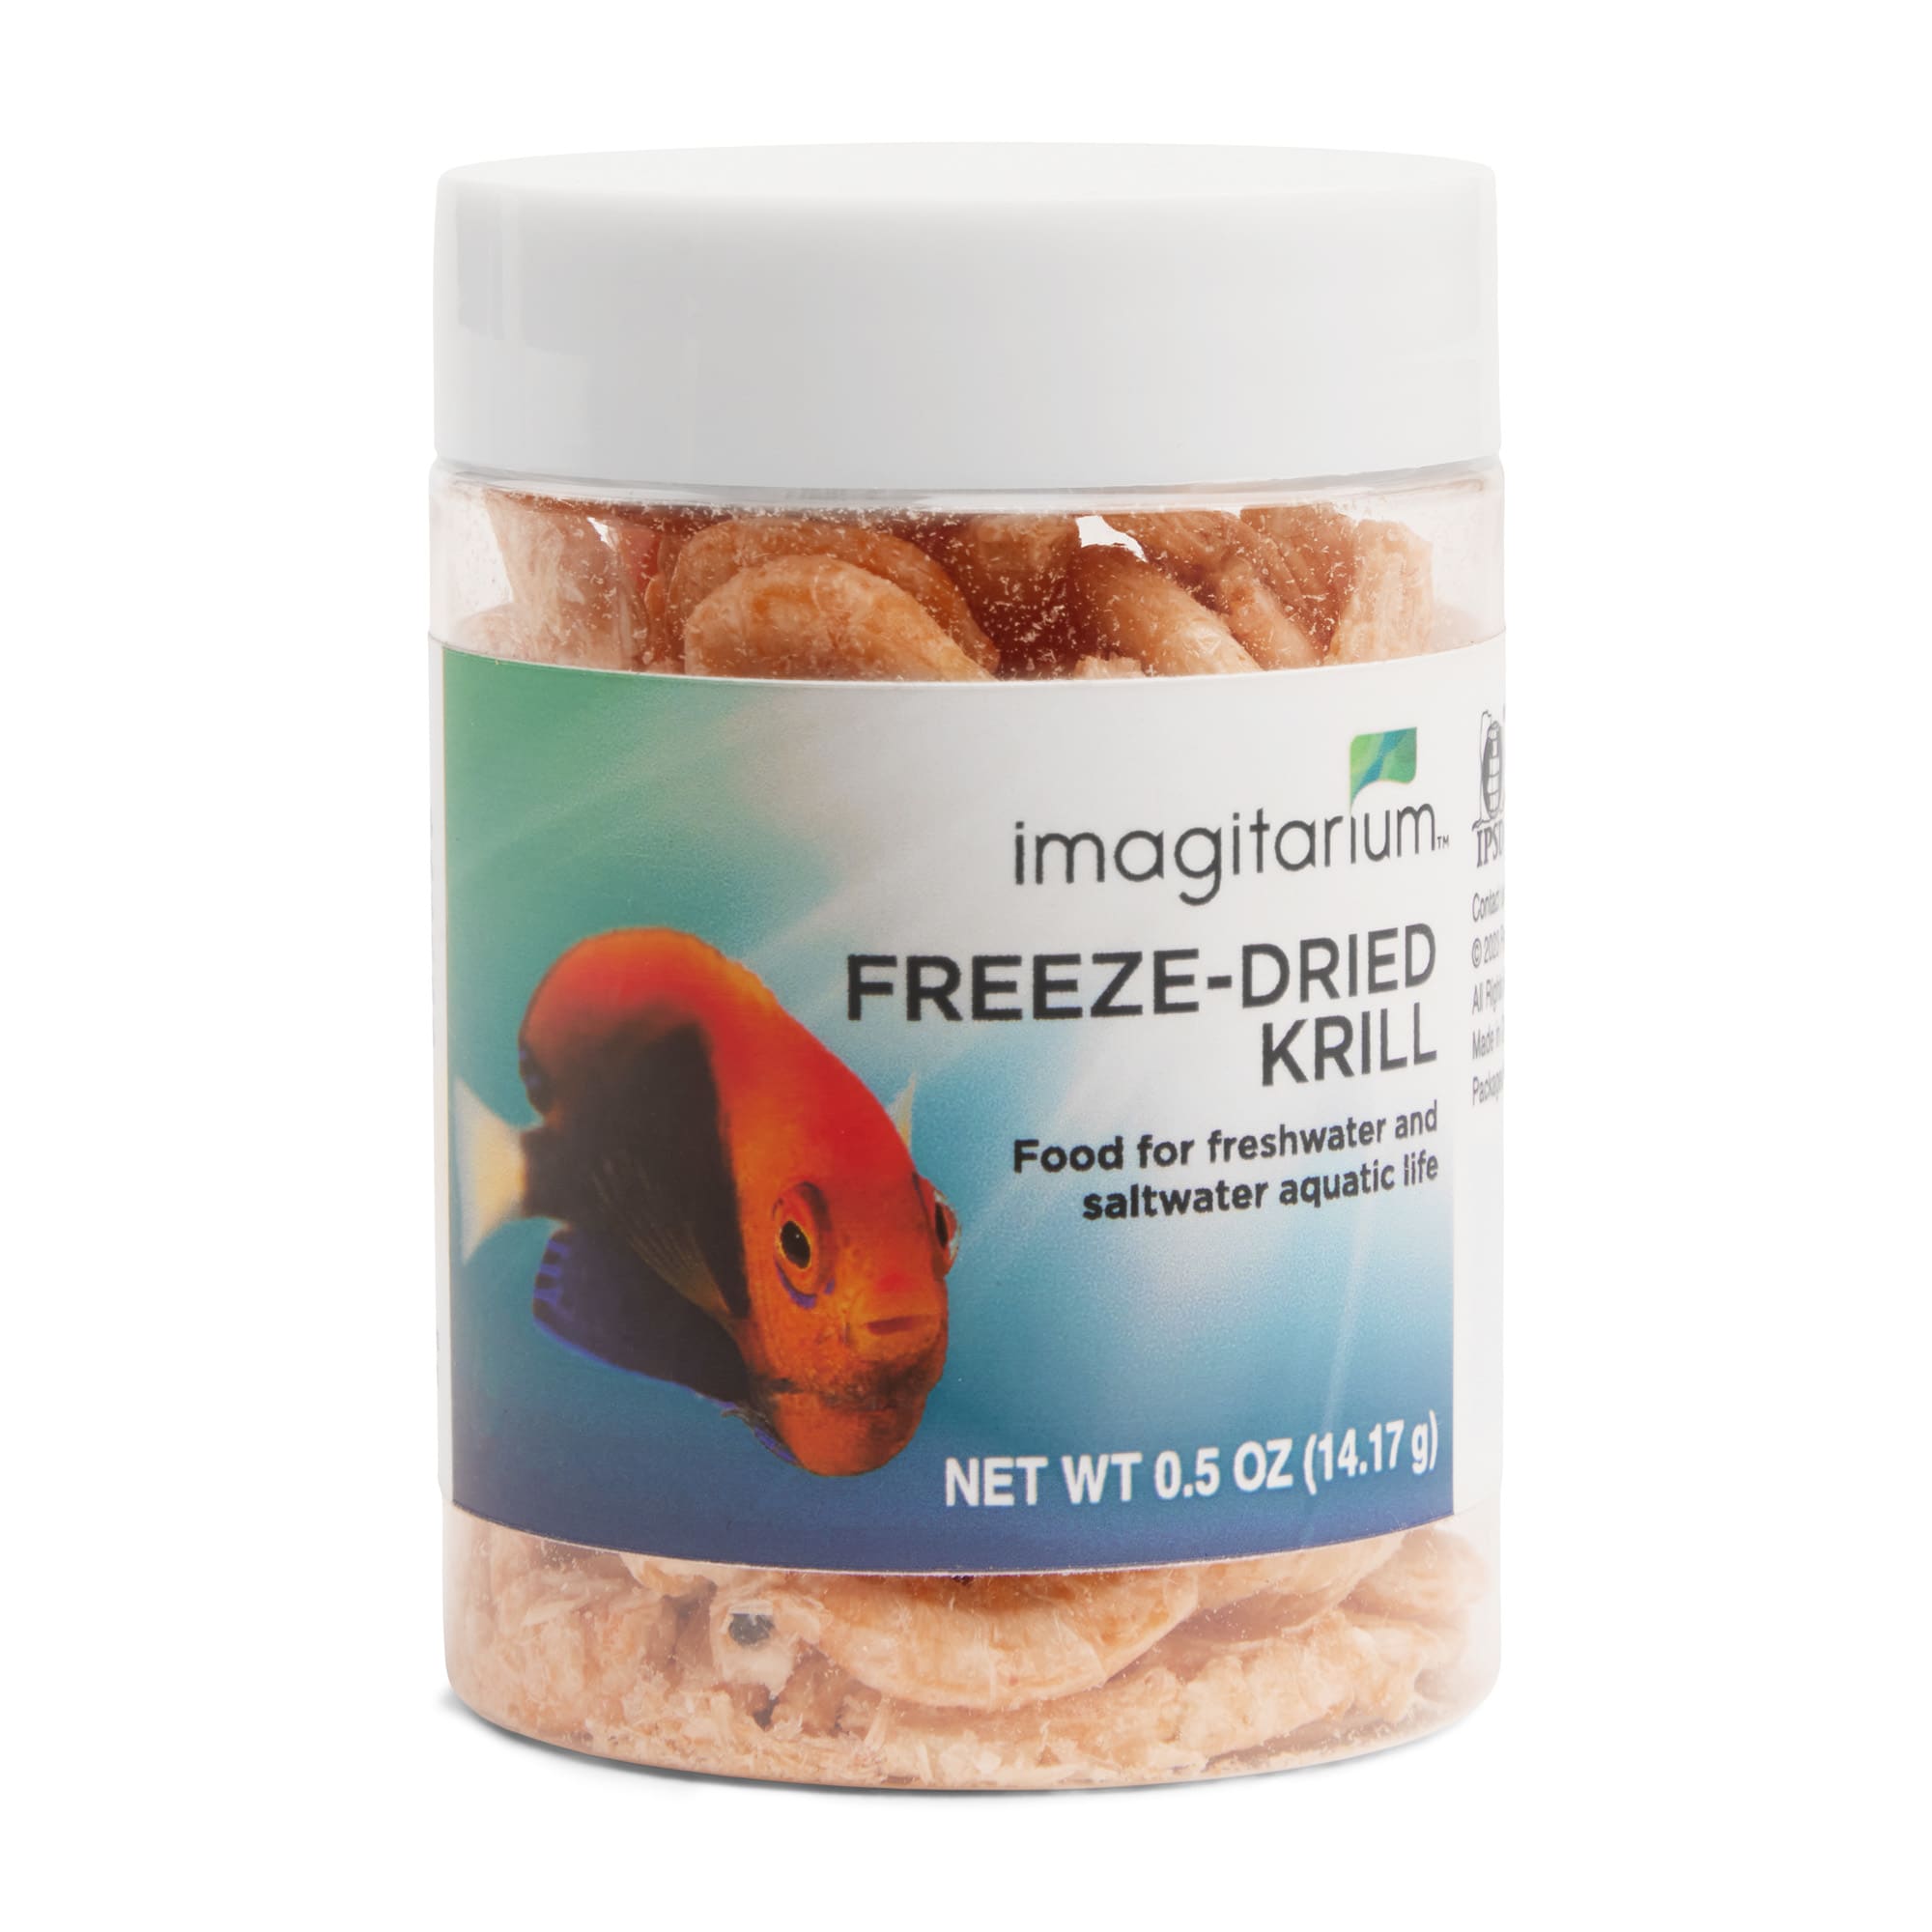 Imagitarium Freeze-Dried Krill Food for Freswater and Salt Water